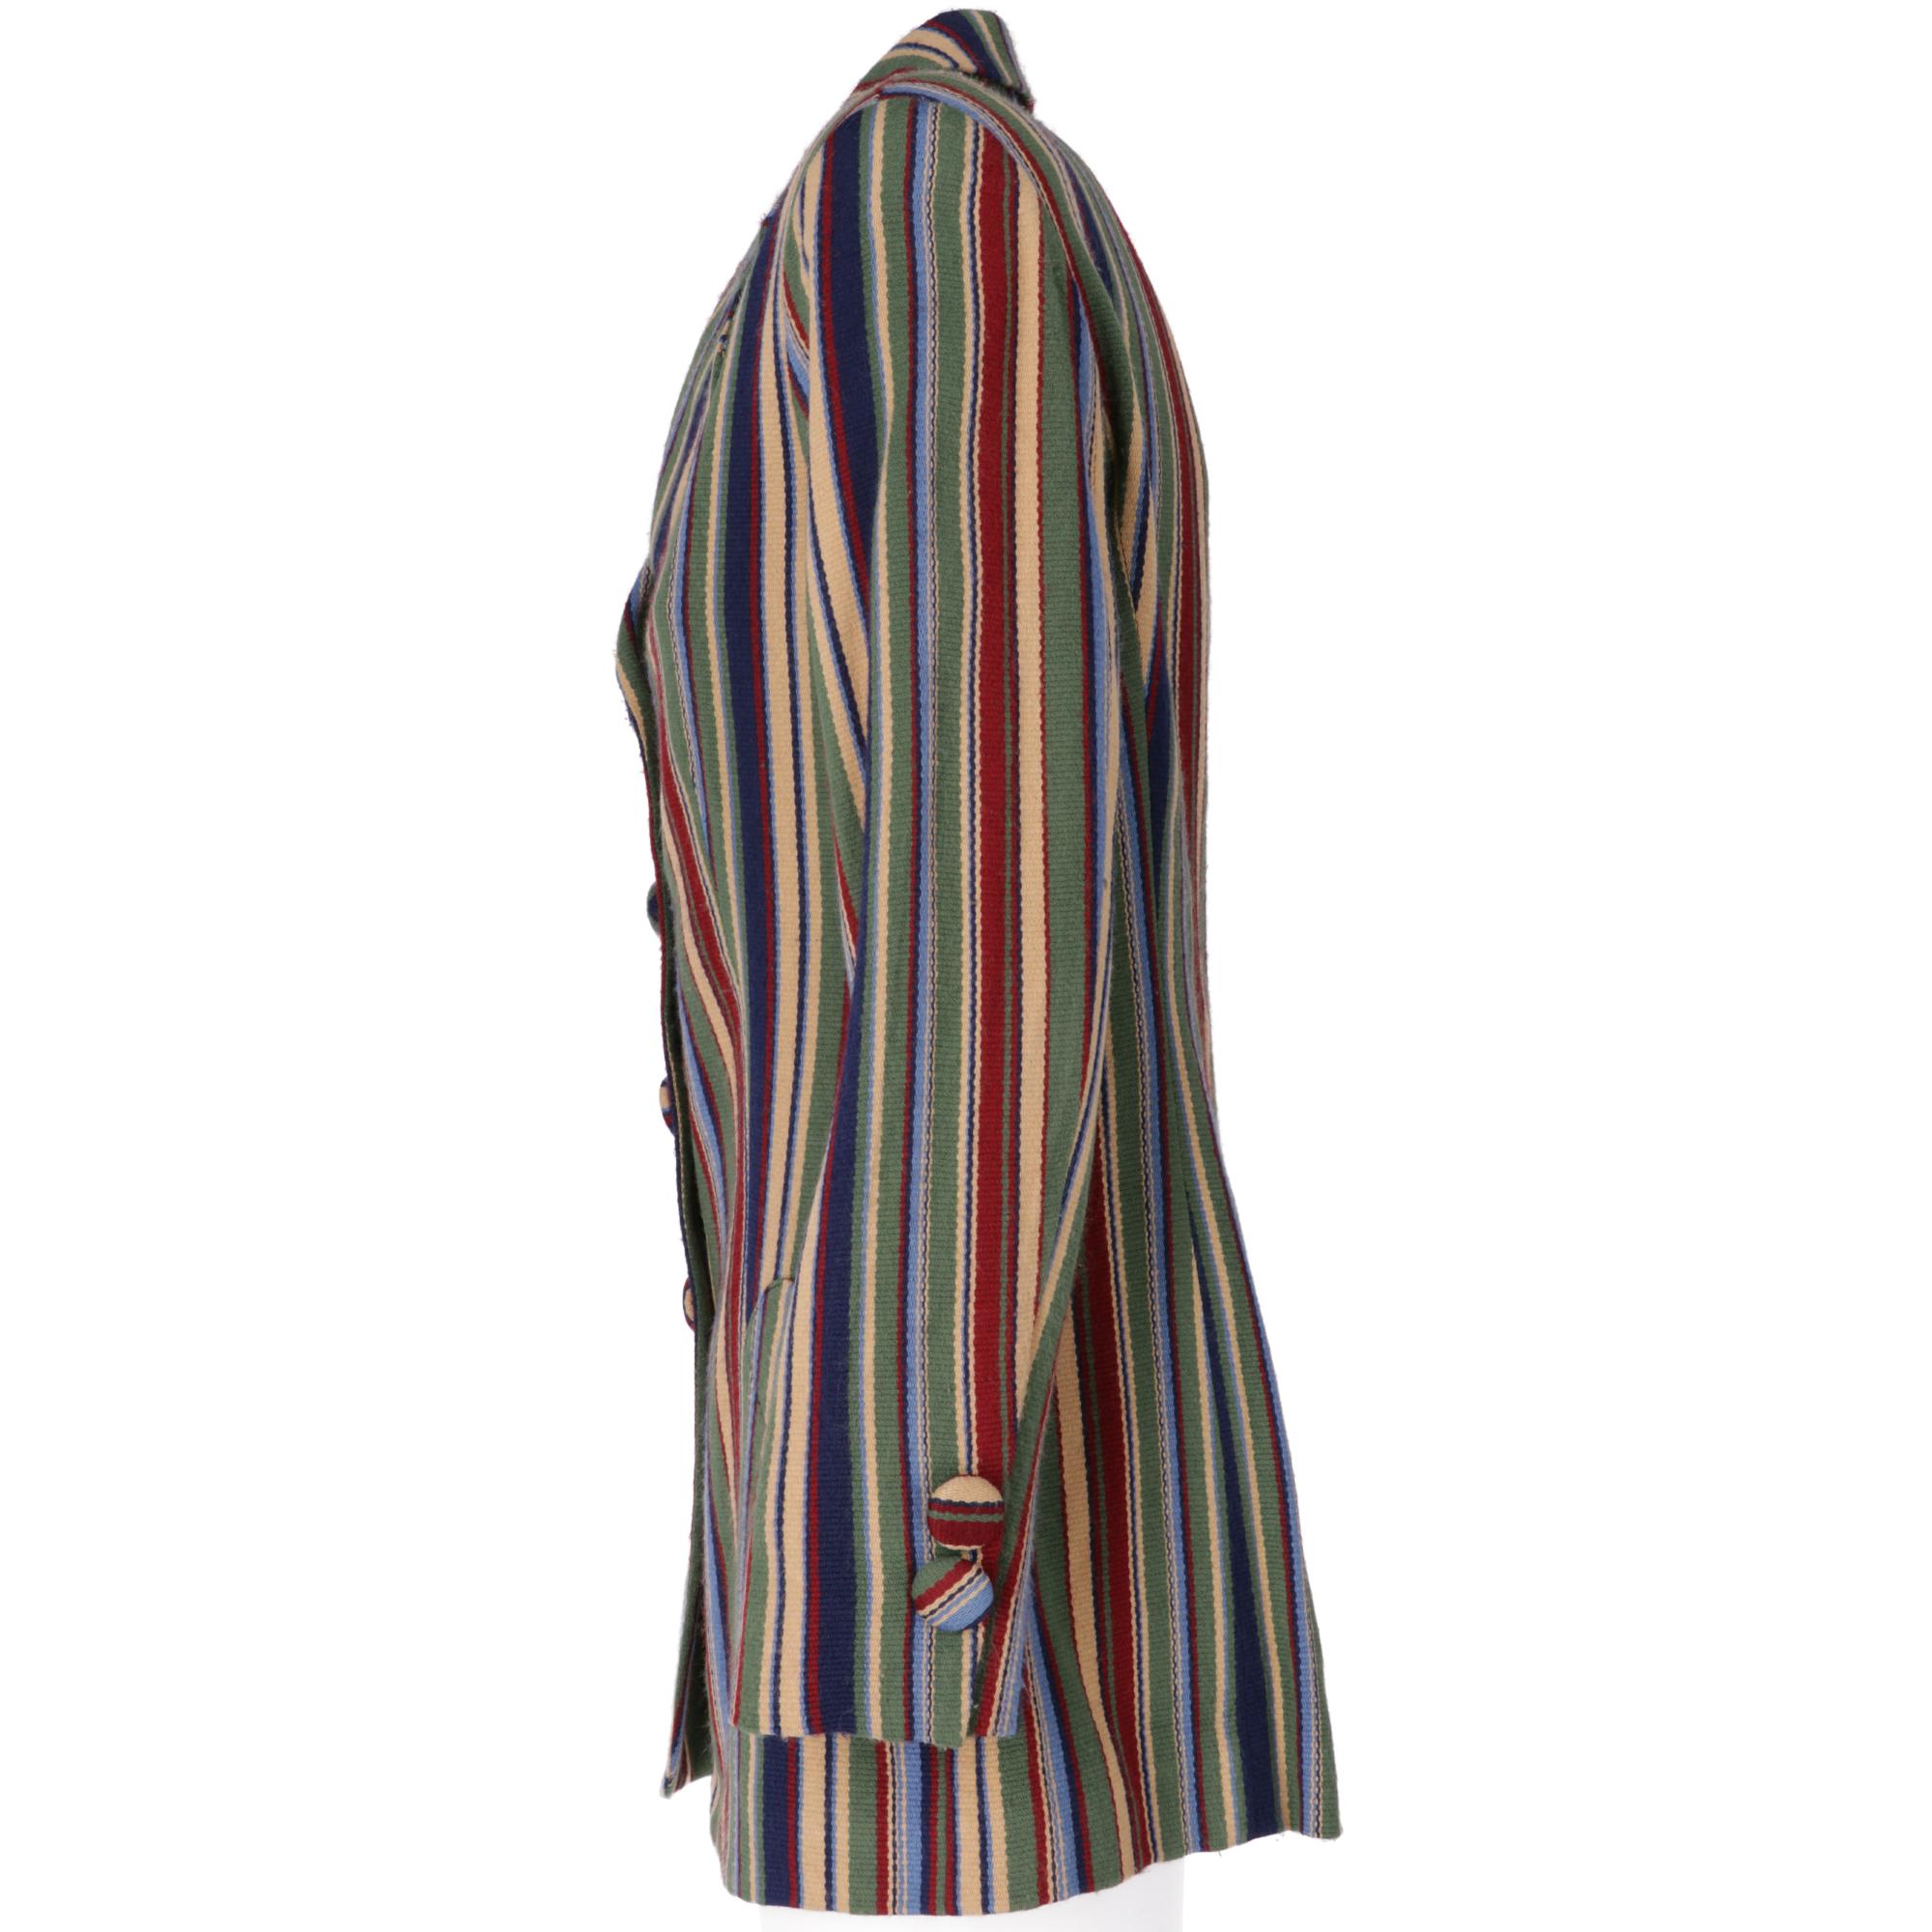 Enrico Coveri blazer in multicolored vertical striped wool, with classic reverse collar, padded shoulders, long sleeves, front closure with buttons covered with the same fabric as the jacket, two welt pockets. Lined

The jacket has fading in the